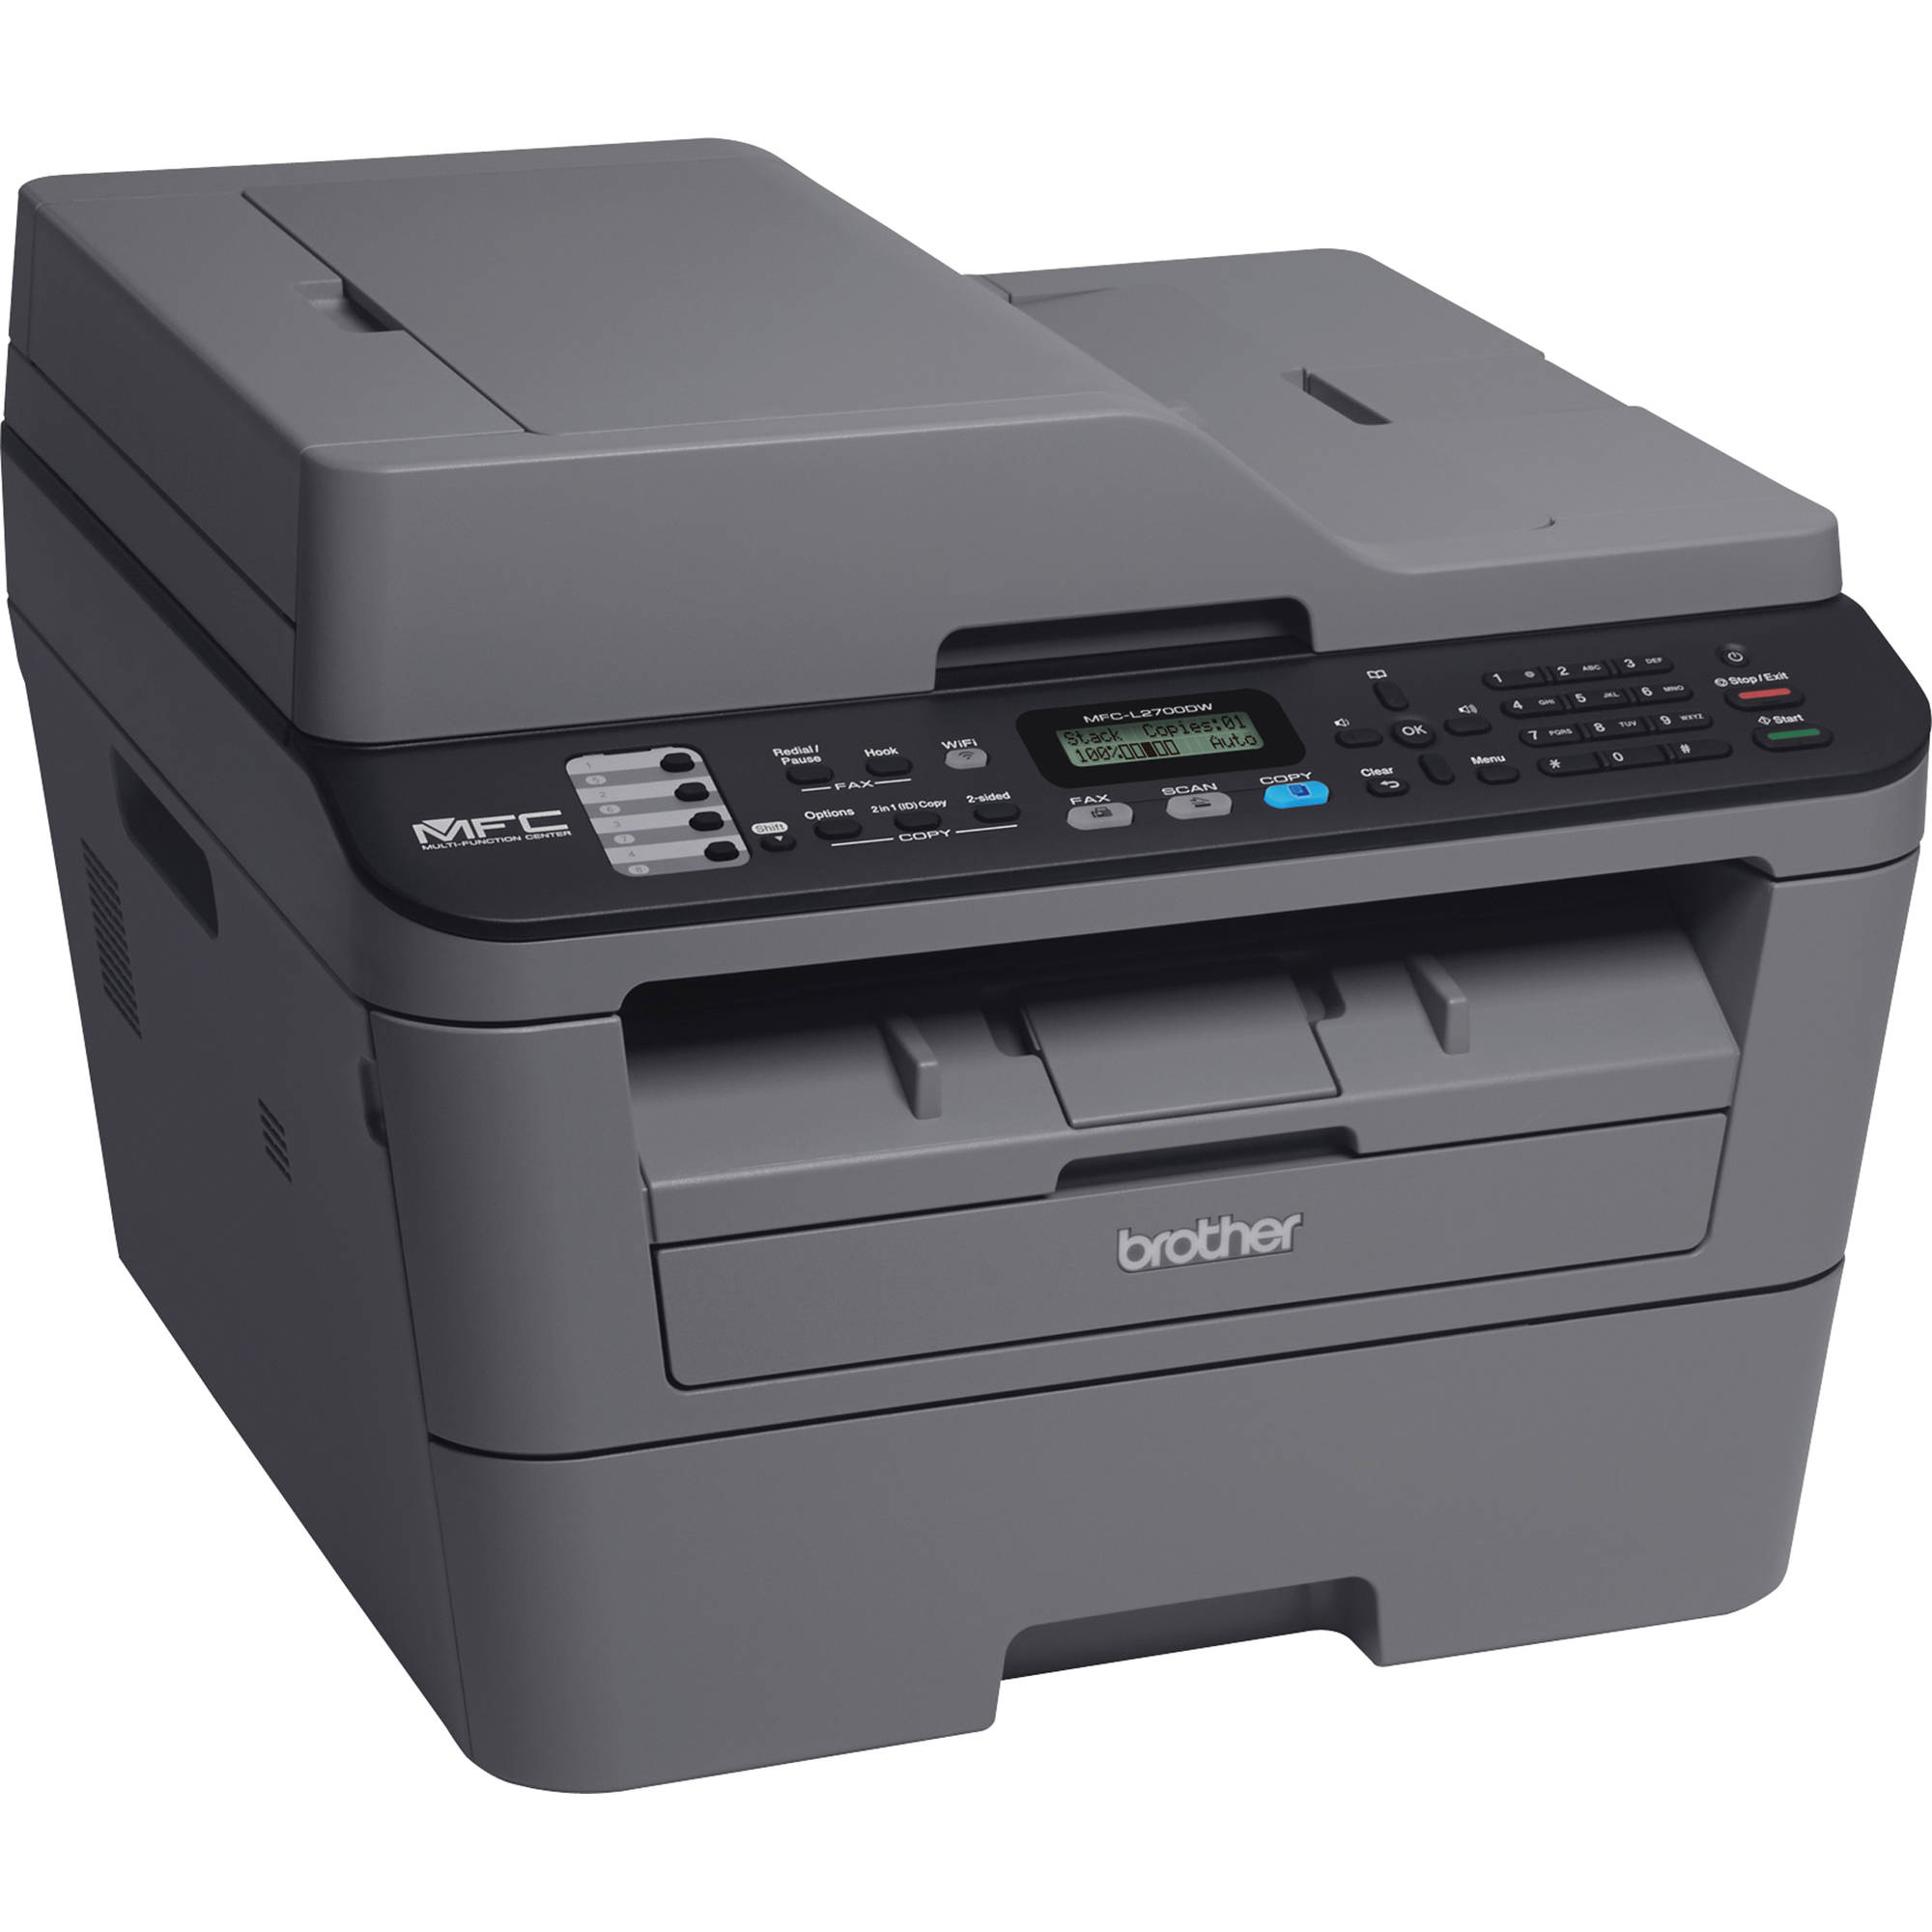 Photo of a Brother MFC-L2700DW All-in-One monochrome laser printer